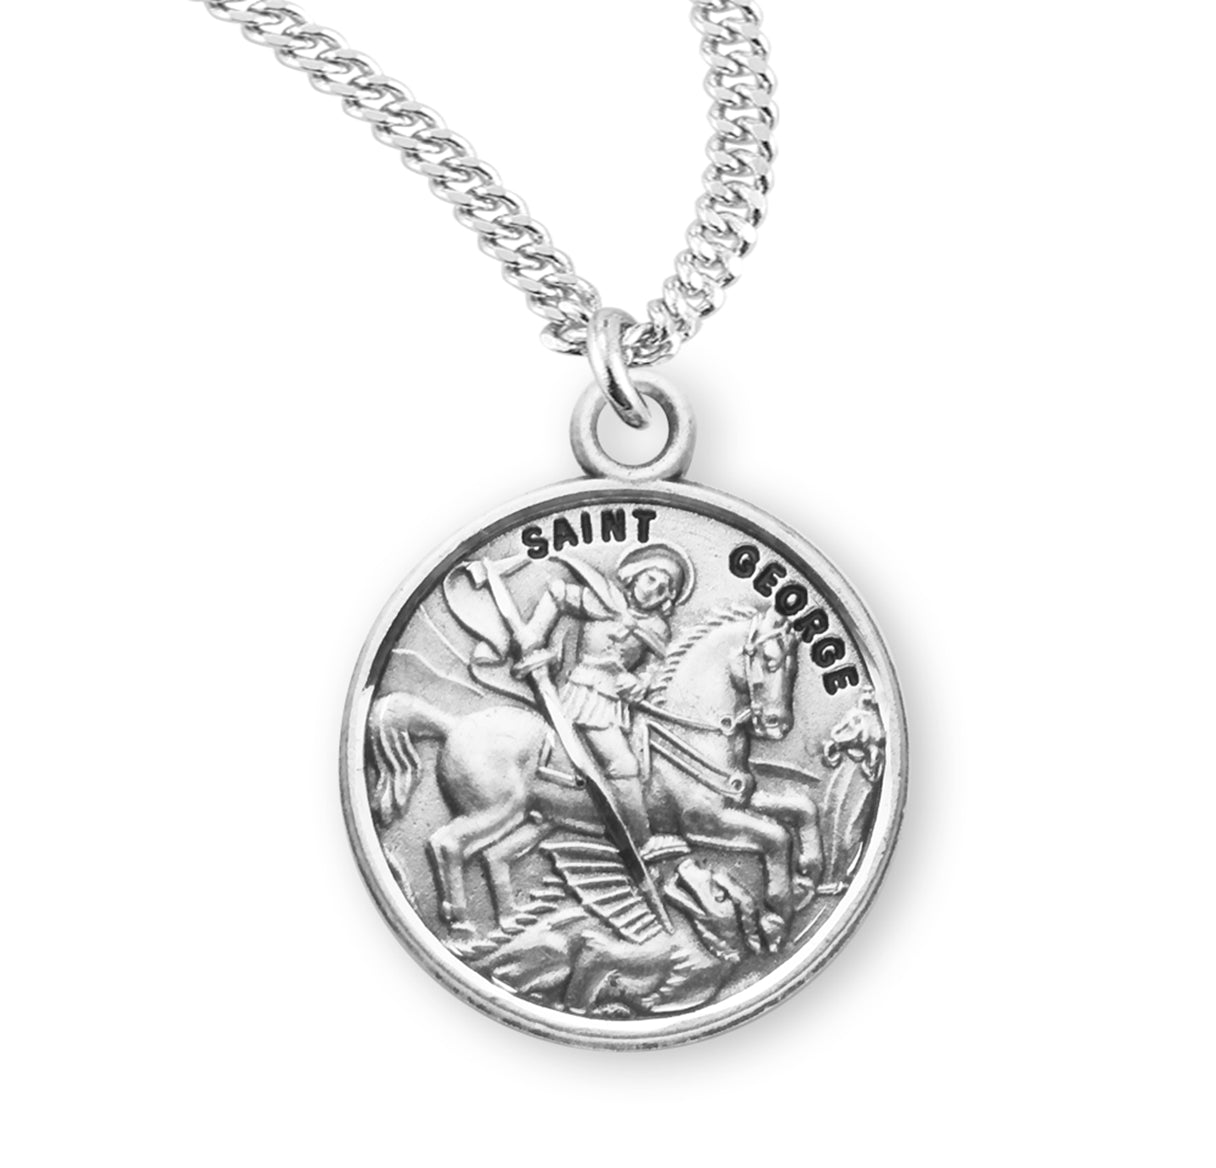 Patron Saint George Round Sterling Silver Medal